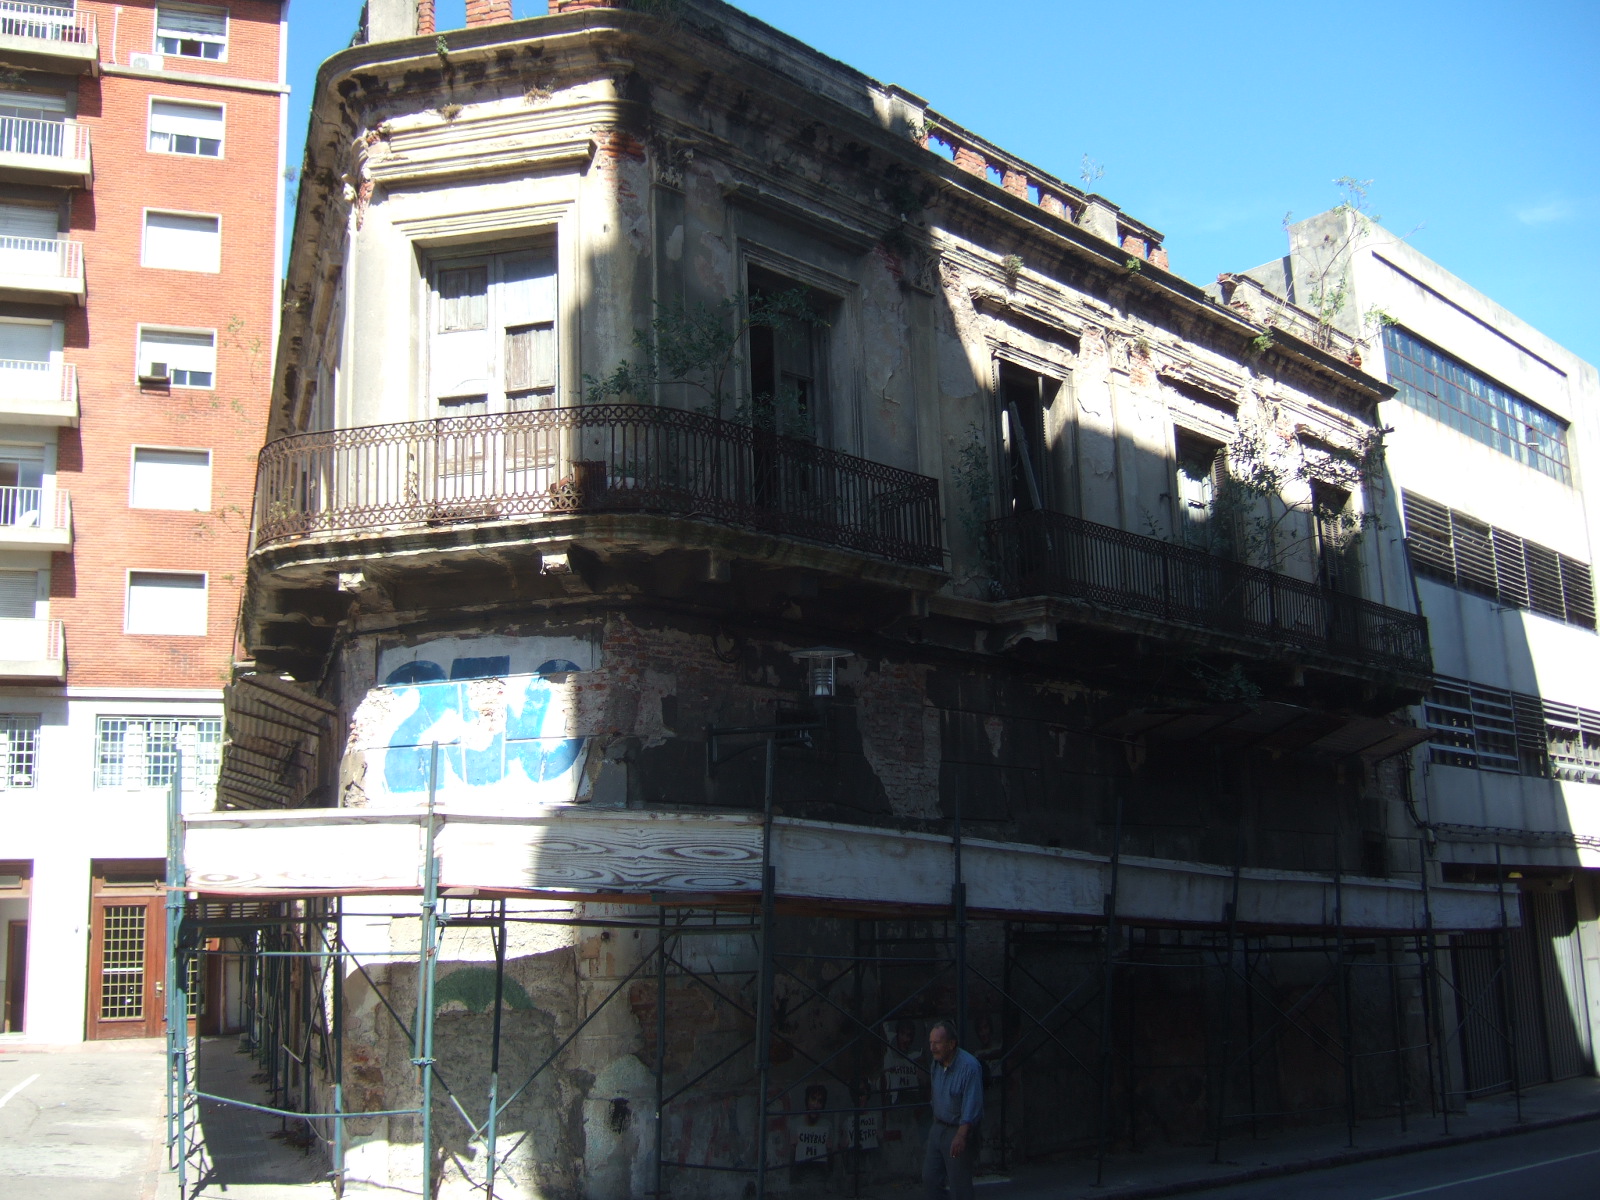 an old building in the street with balconies and graffiti on it